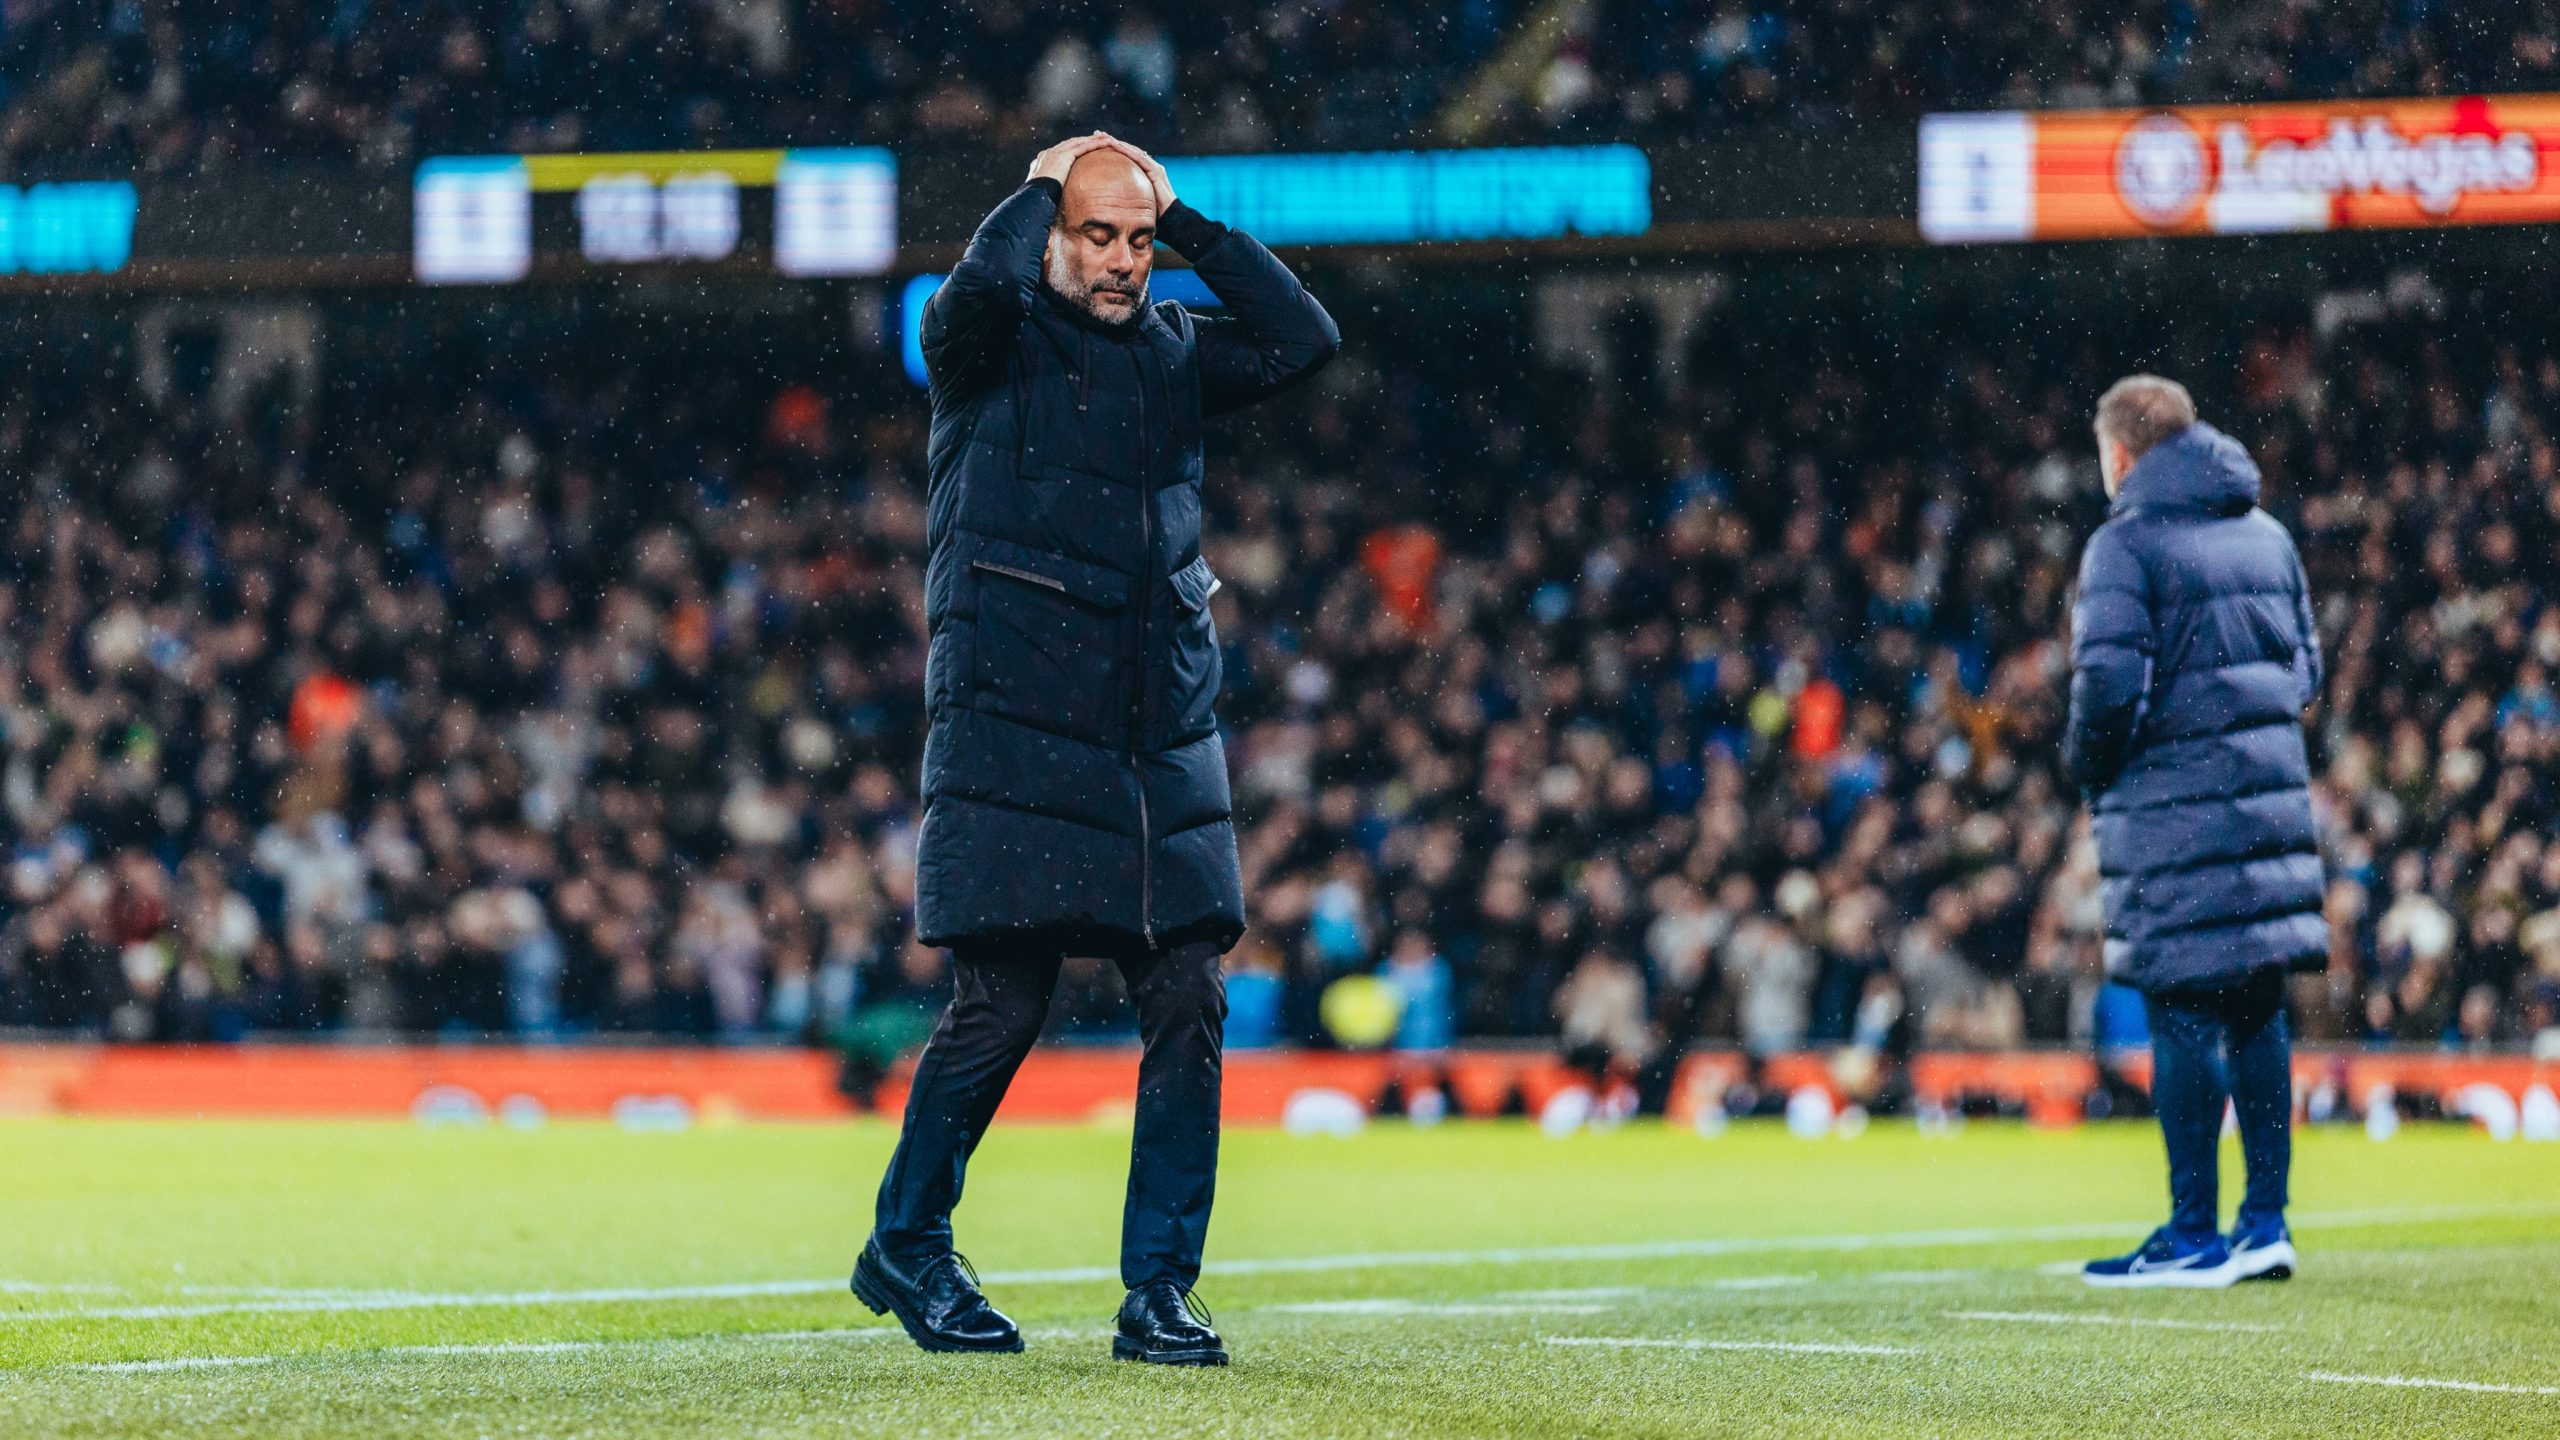 Pep Guardiola expresses unwavering belief in Manchester City's ability to secure a historic fourth consecutive Premier League title, despite recent draws and defensive vulnerabilities.